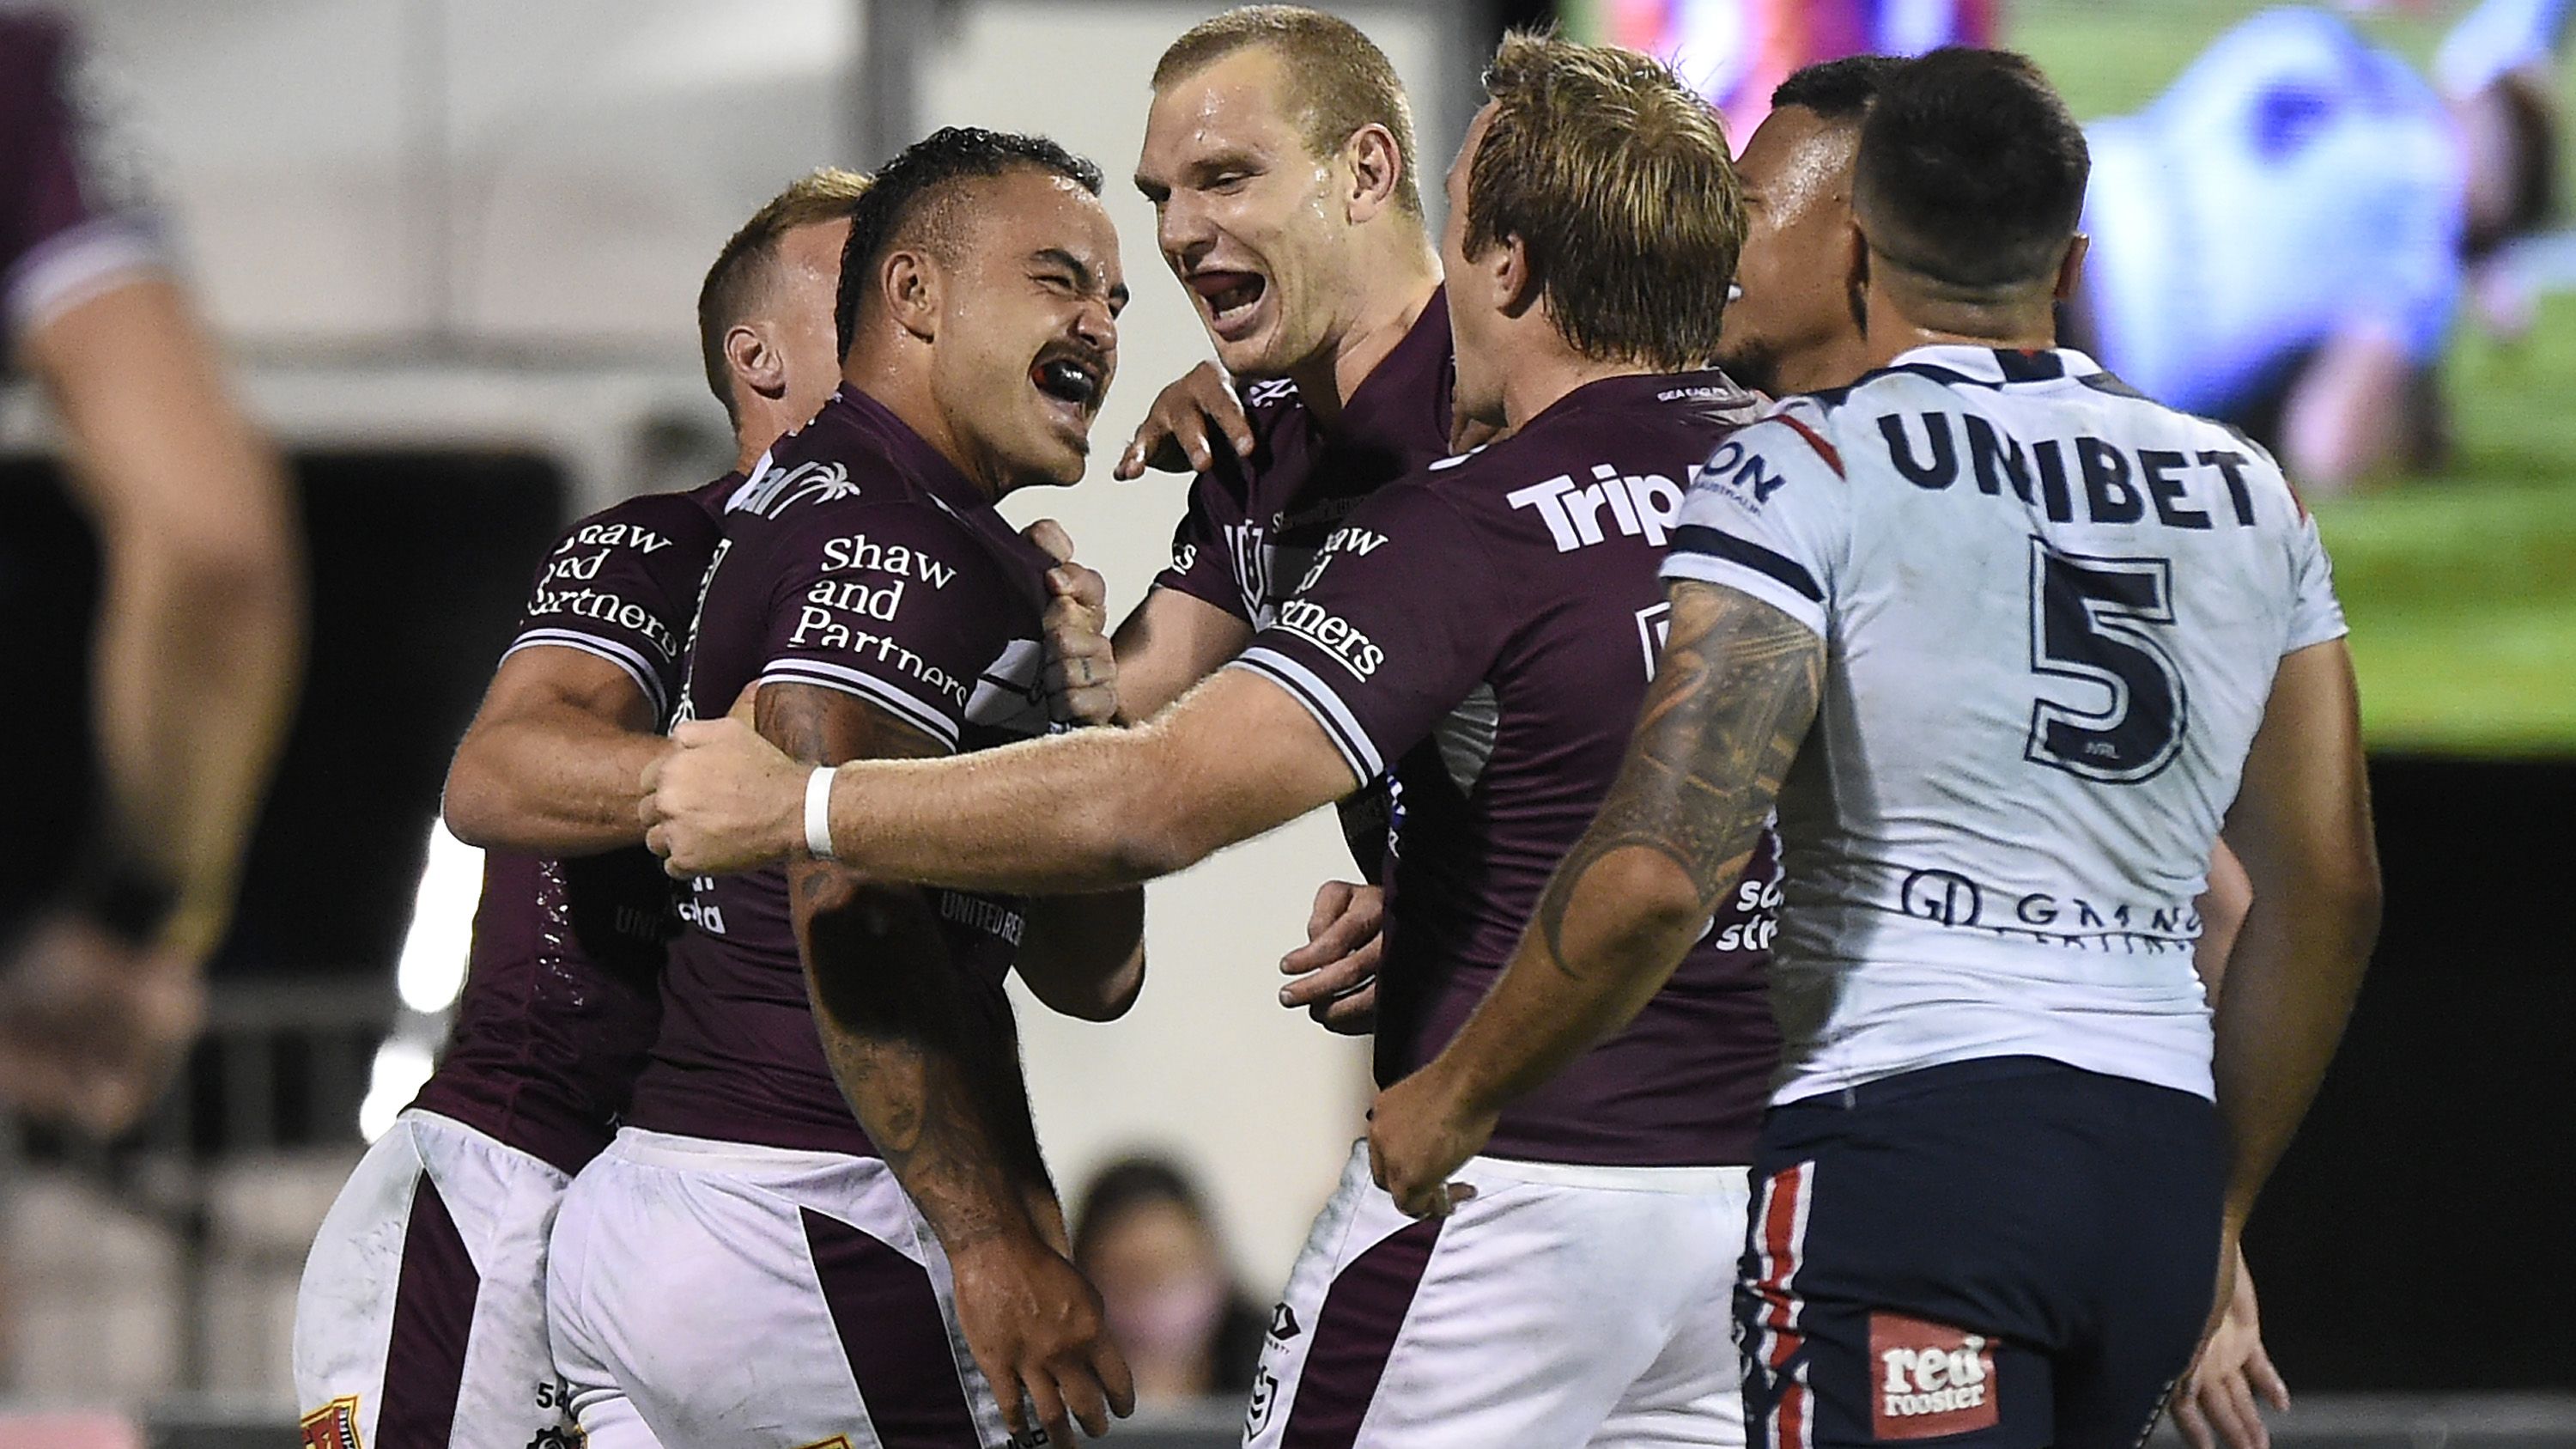 Contract revelation as Sea Eagles thrash Roosters